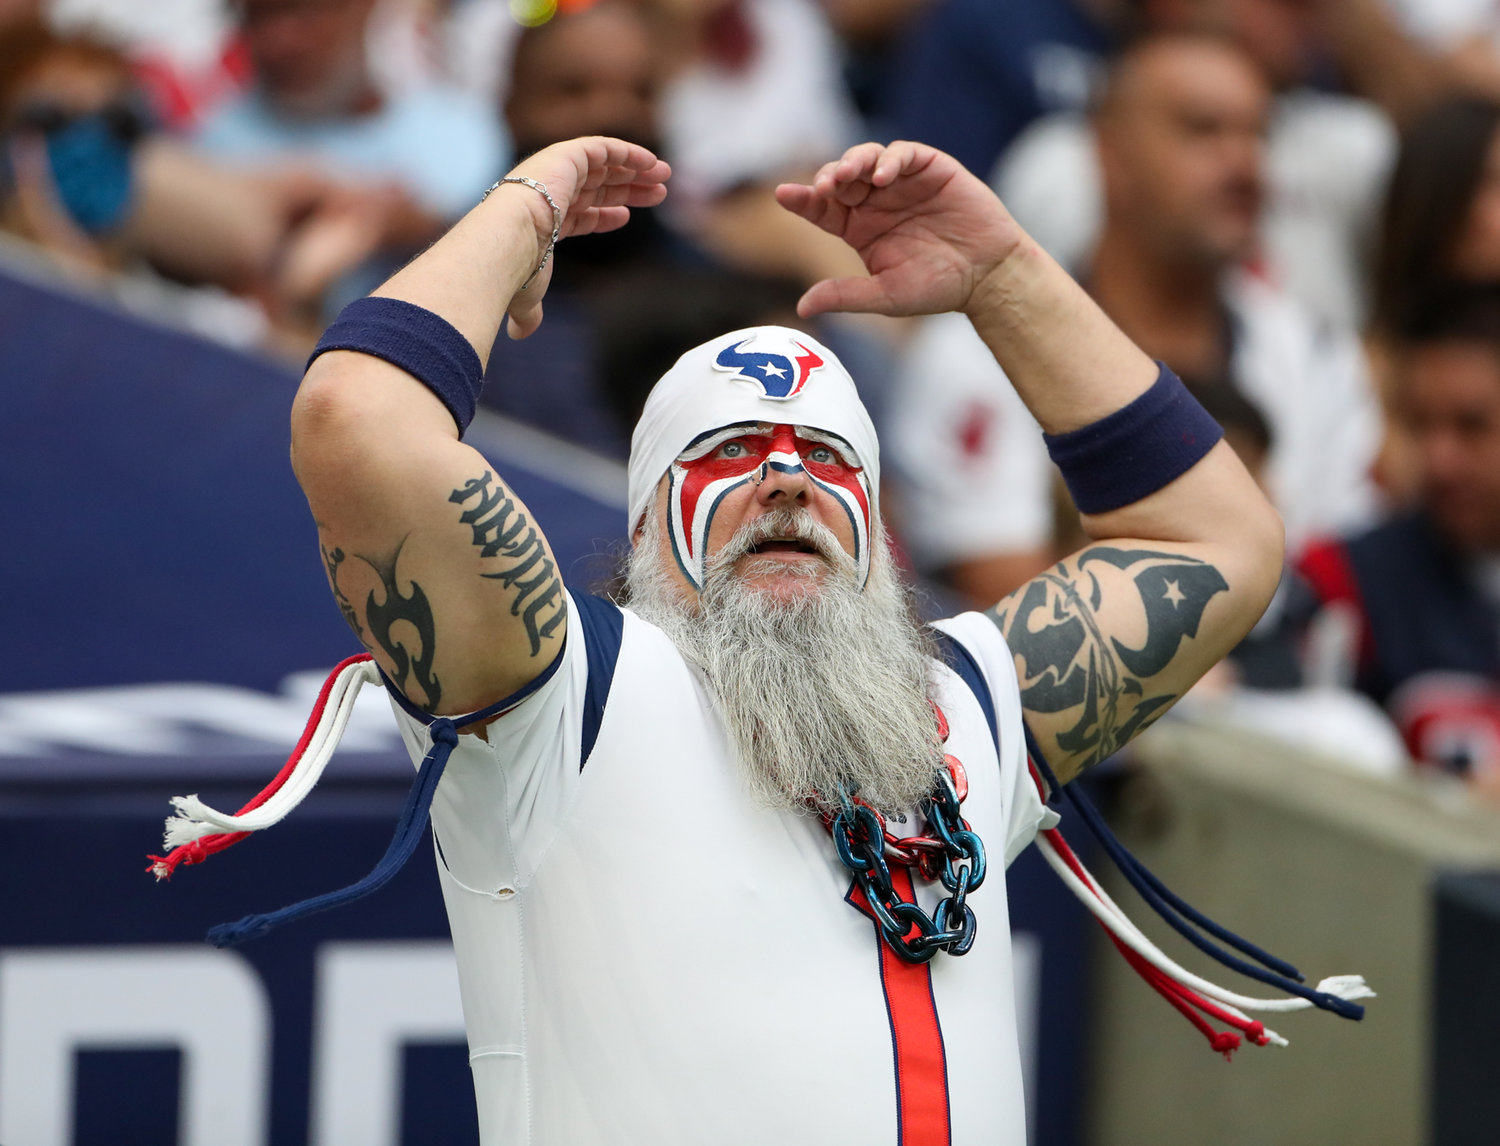 The Houston Texans “Ultimate Fan” cheers during the first half of an NFL game between the Houston Texans and the Jacksonville Jaguars on September 12, 2021 in Houston, Texas.